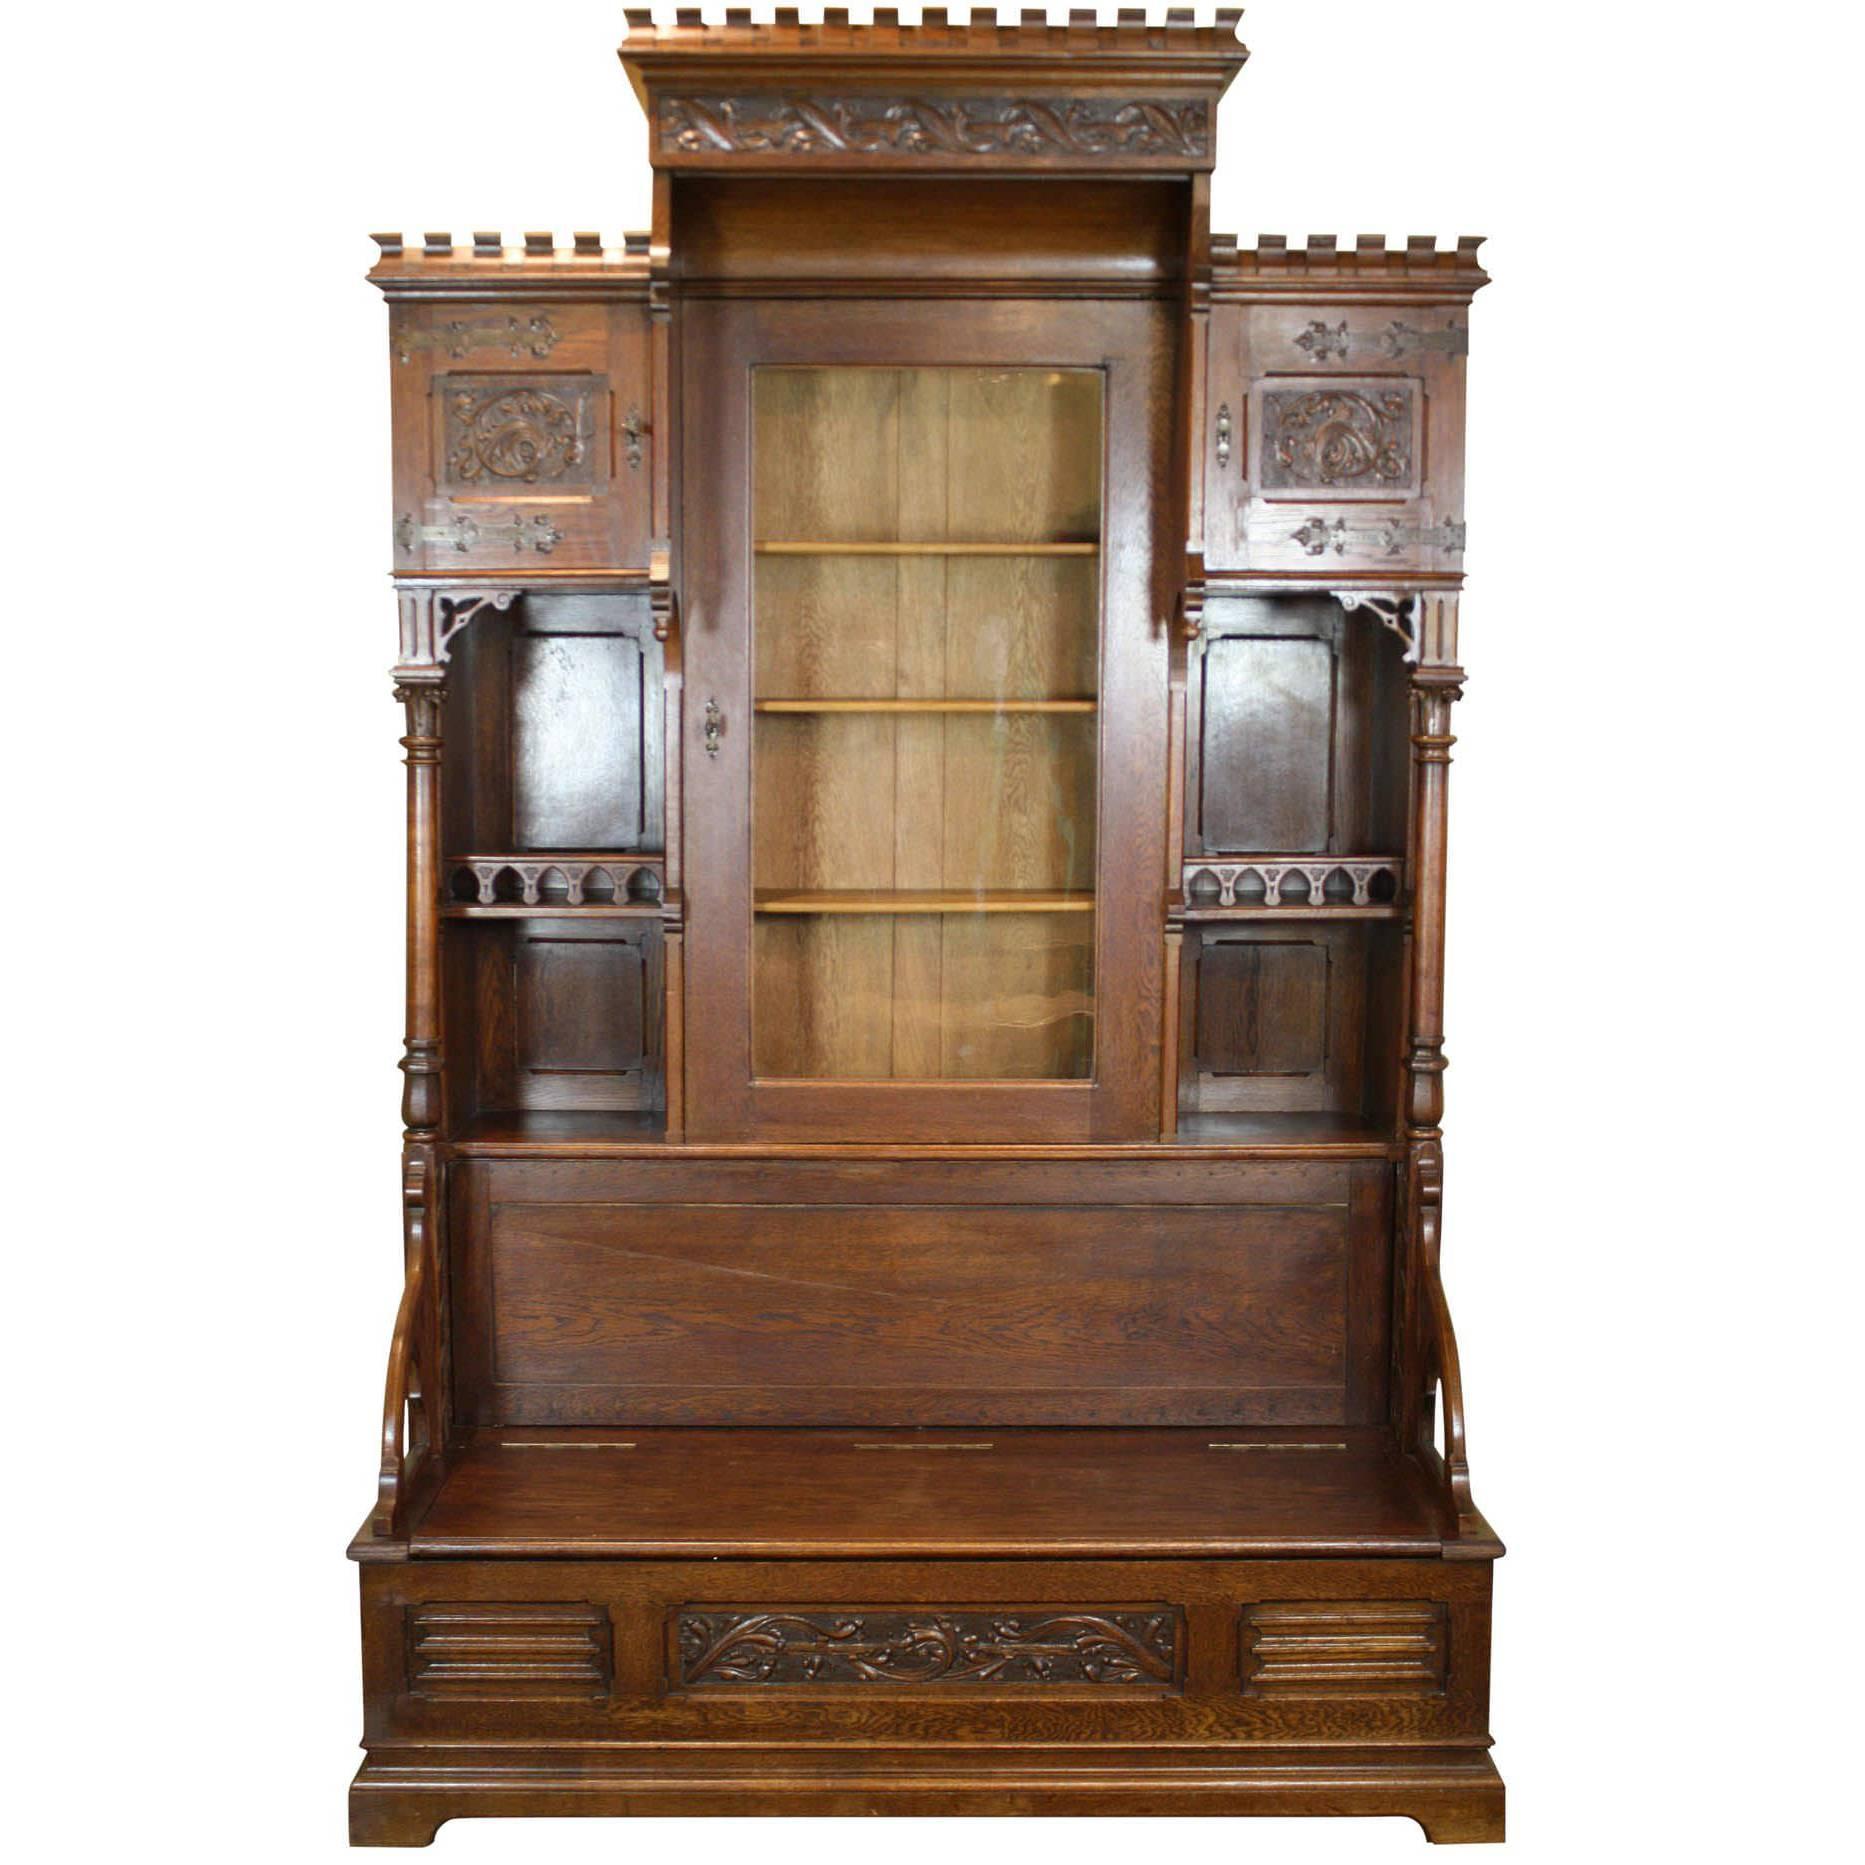 Gothic Revival Bookcase with Bench and Storage, circa 1875